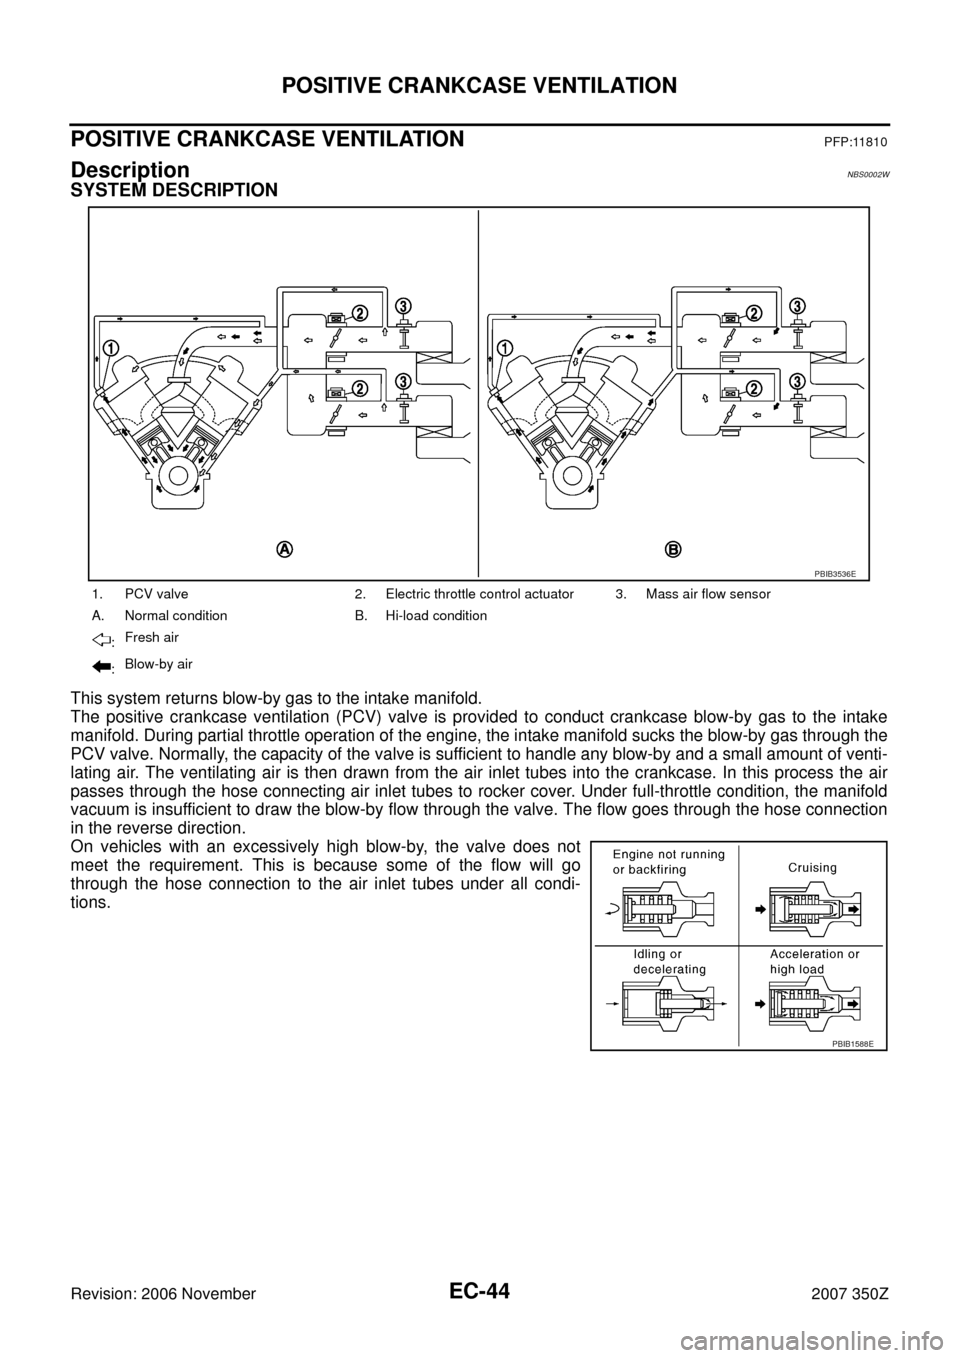 NISSAN 350Z 2007 Z33 Engine Control Workshop Manual EC-44
POSITIVE CRANKCASE VENTILATION
Revision: 2006 November2007 350Z
POSITIVE CRANKCASE VENTILATIONPFP:11810
DescriptionNBS0002W
SYSTEM DESCRIPTION
This system returns blow-by gas to the intake manif